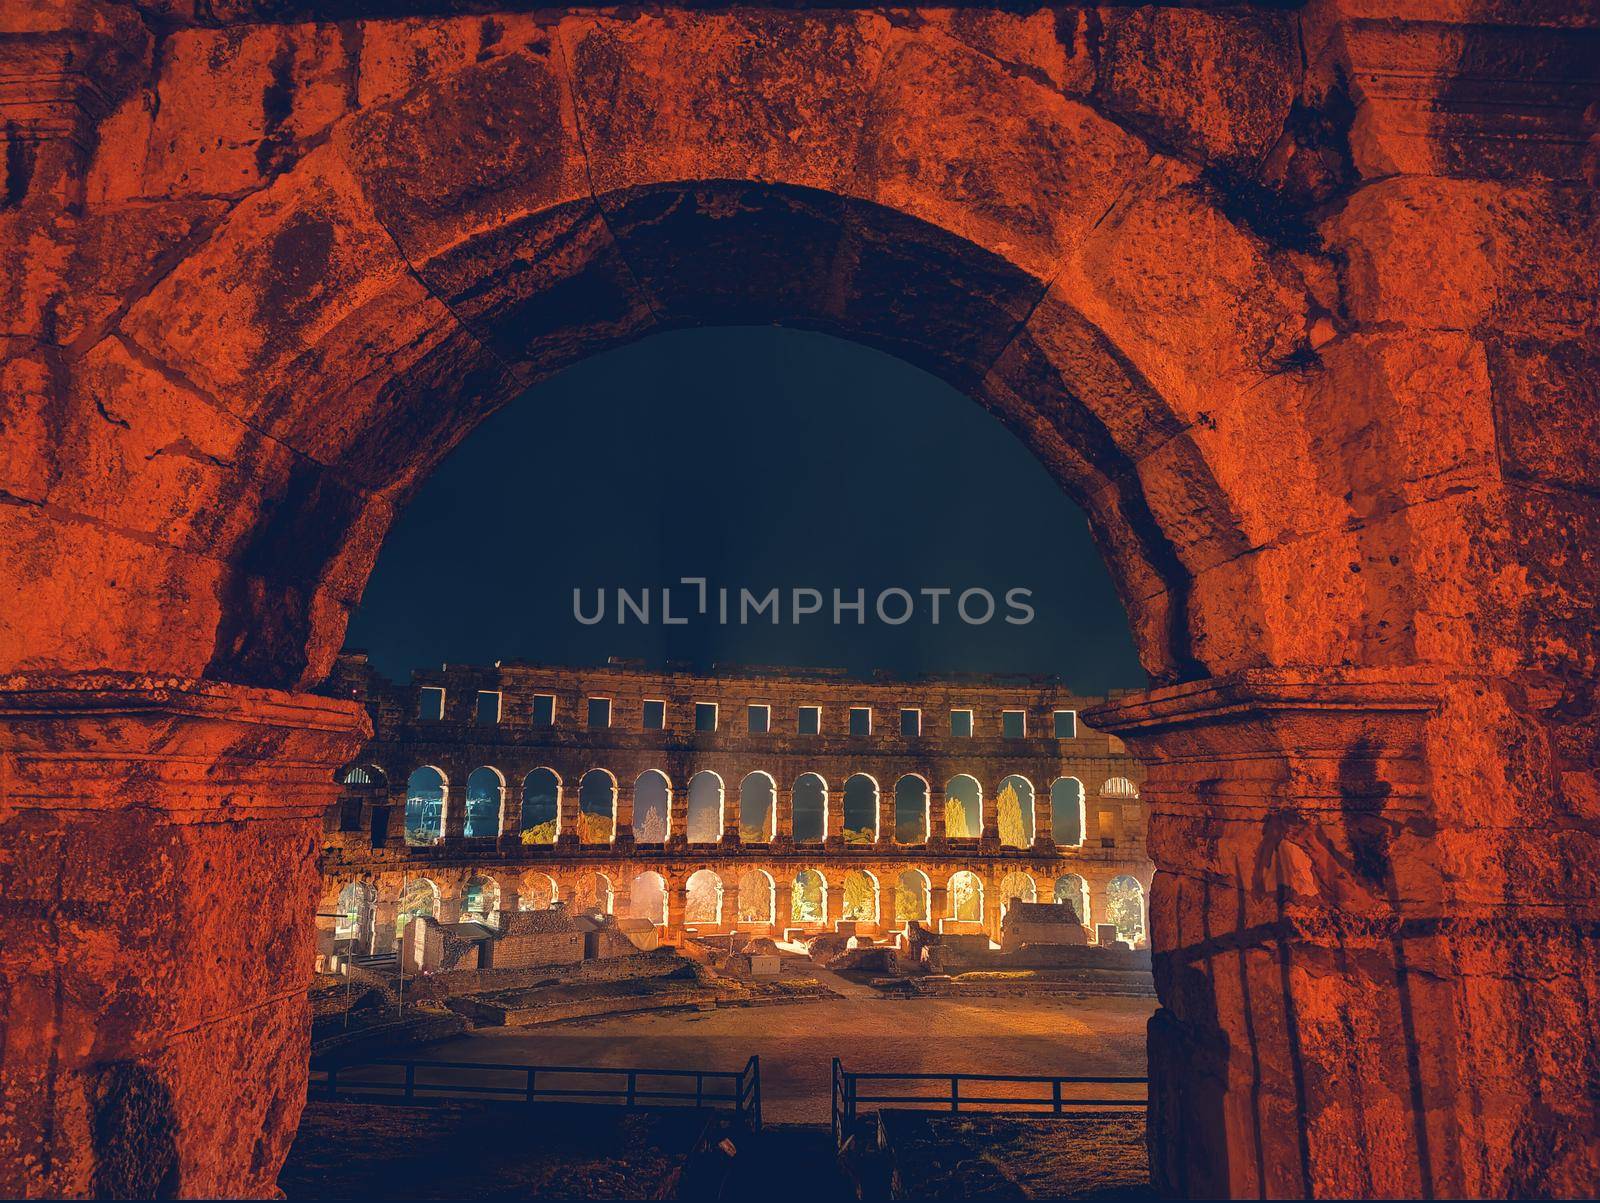 Croatia. Pula. Ruins of the best preserved Roman amphitheatre built in the first century AD during the reign of the Emperor Vespasian shot at night.